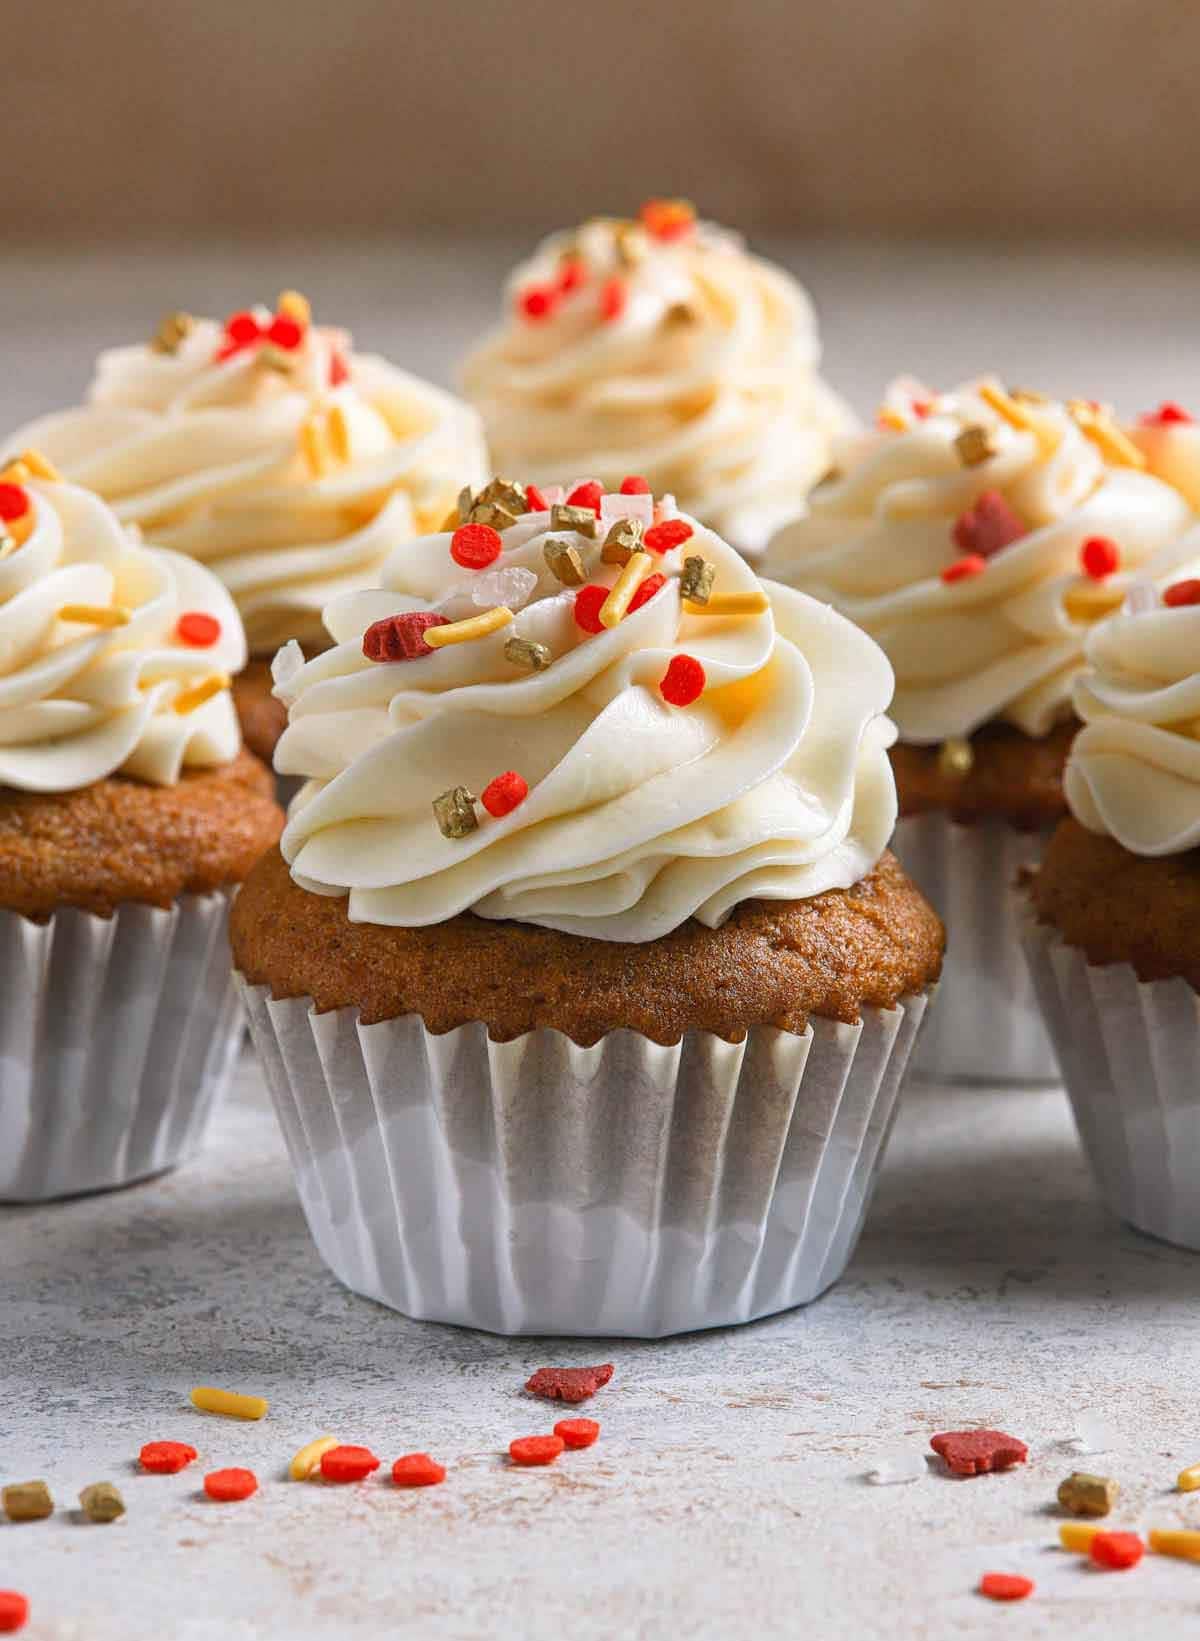 Pumpkin cupcakes with cream frosting on top.